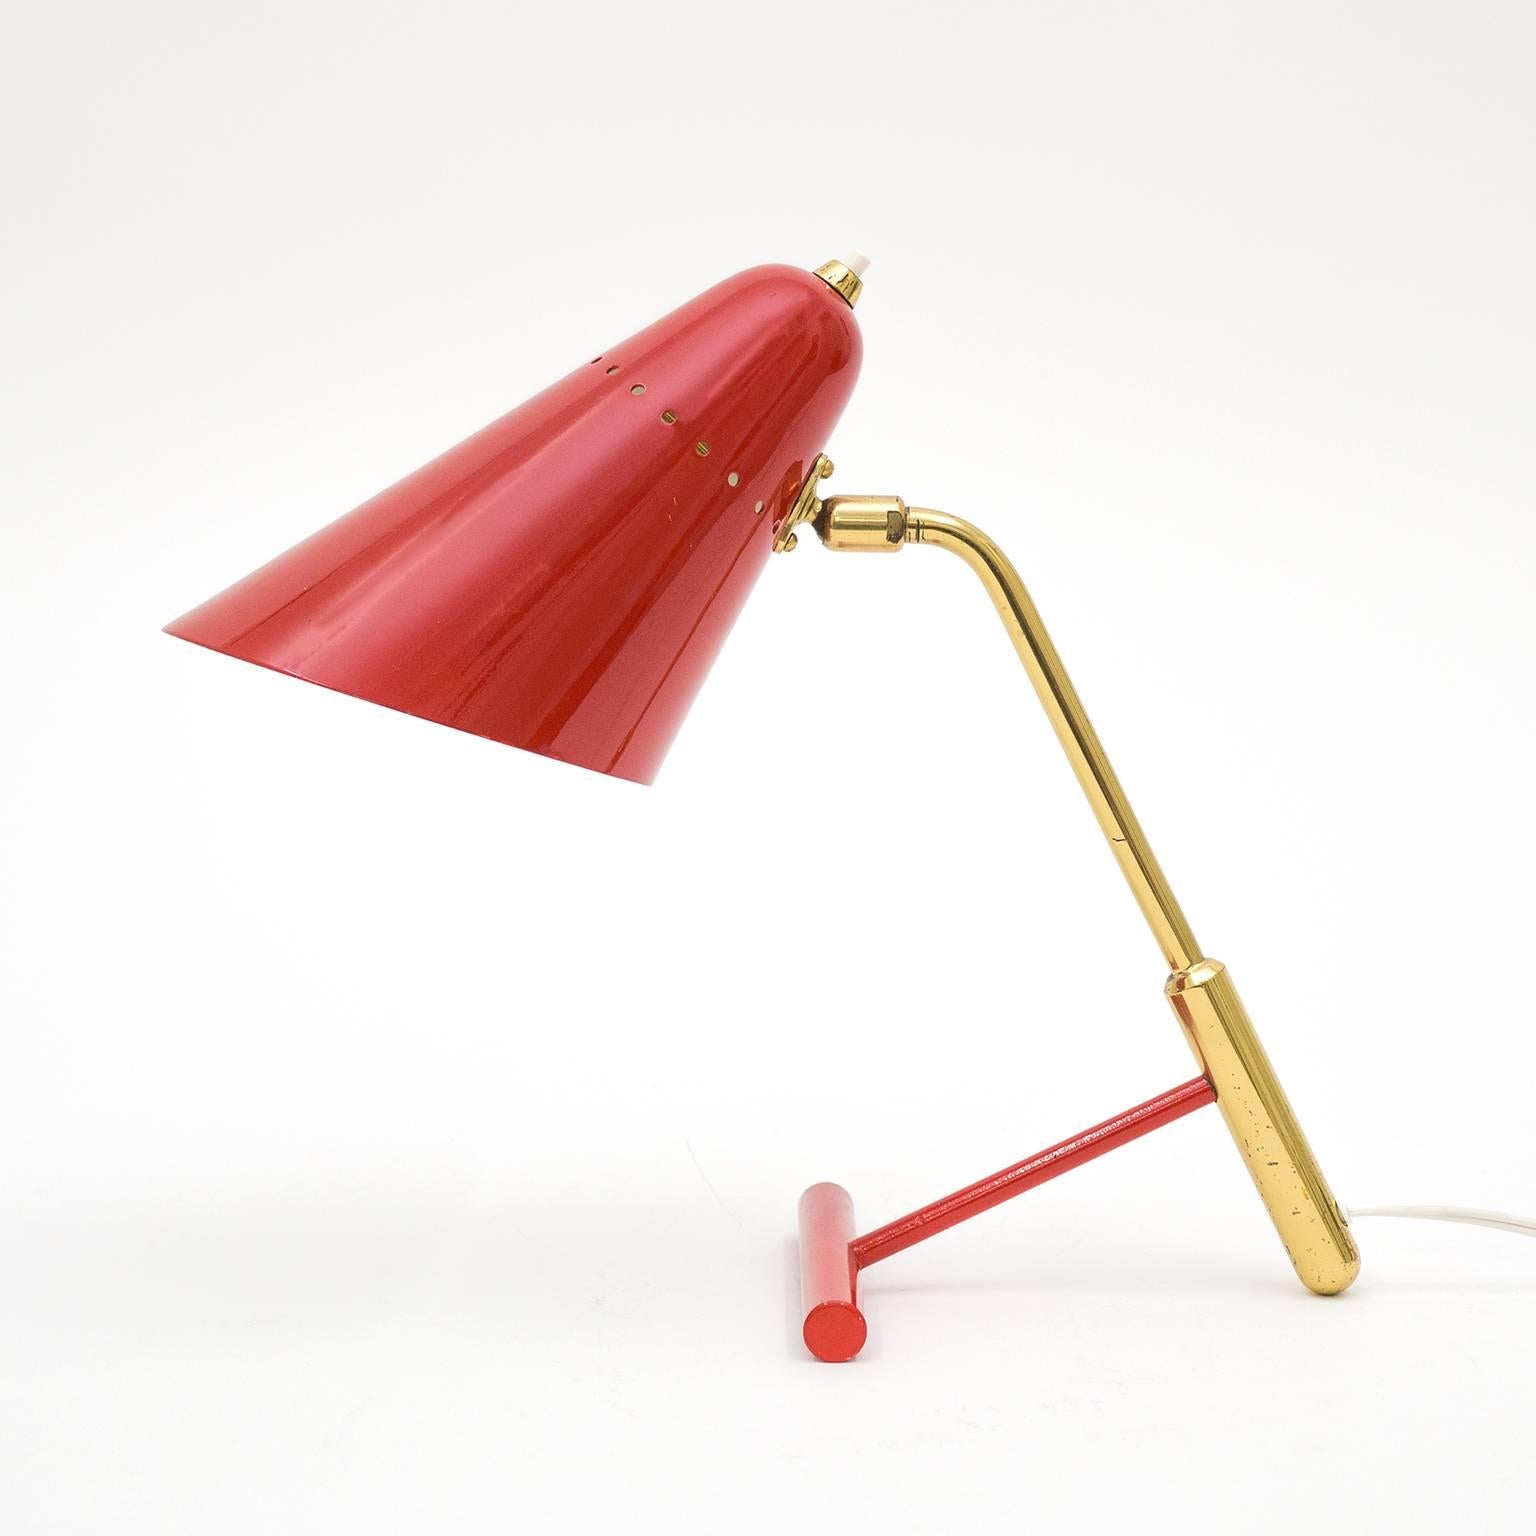 Superb Stilnovo table or desk lamp in brass and lacquered aluminum. Excellent original condition with only minimal wear to the "T"-base and a touch of patina to the brass stem. Takes one E14 bulb.